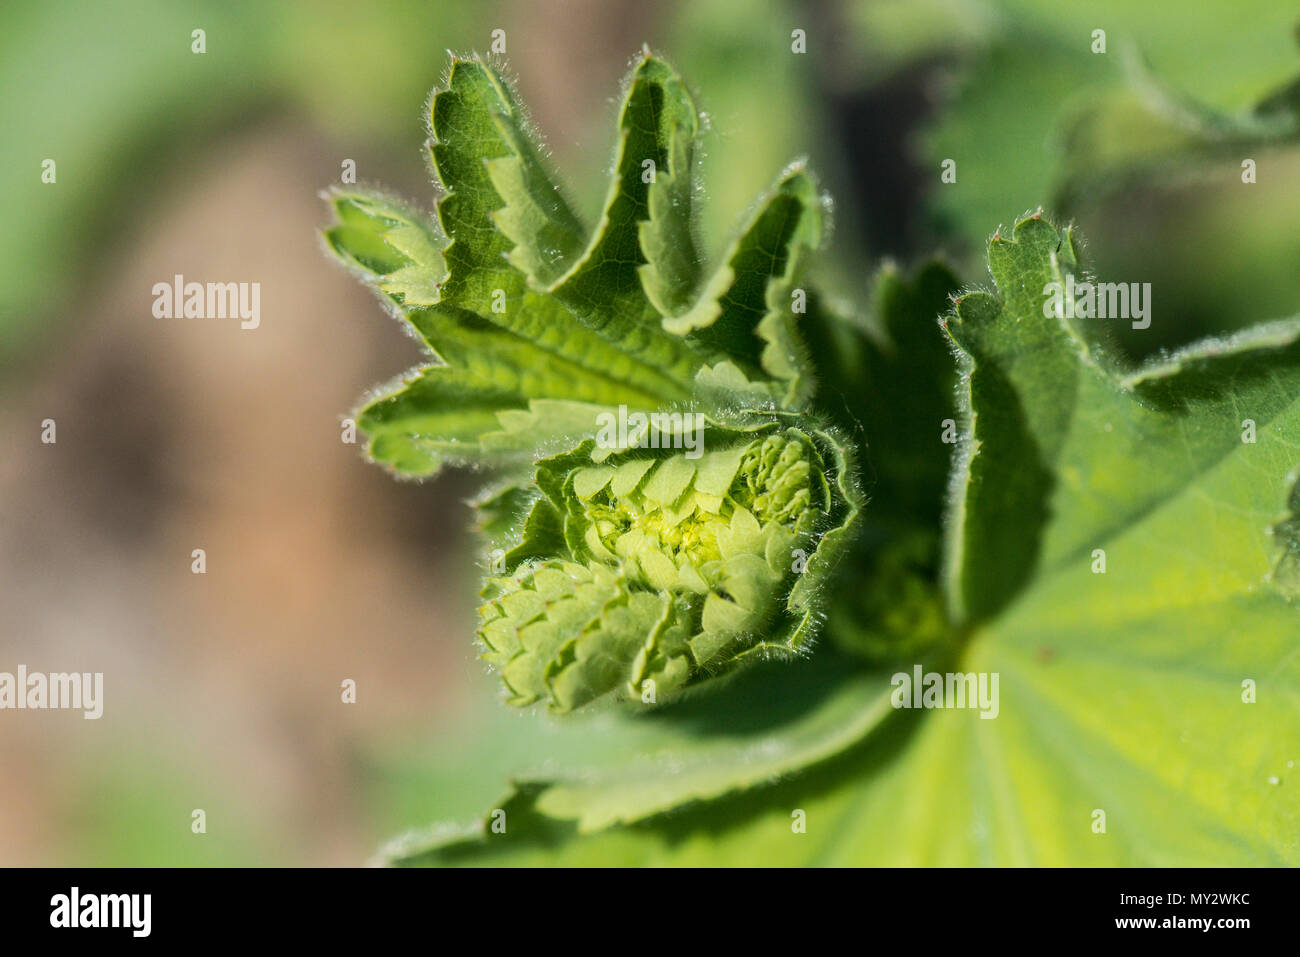 A close up of a leaf of a leaf of a garden lady's-mantle (Alchemilla mollis) beginning to unfurl Stock Photo